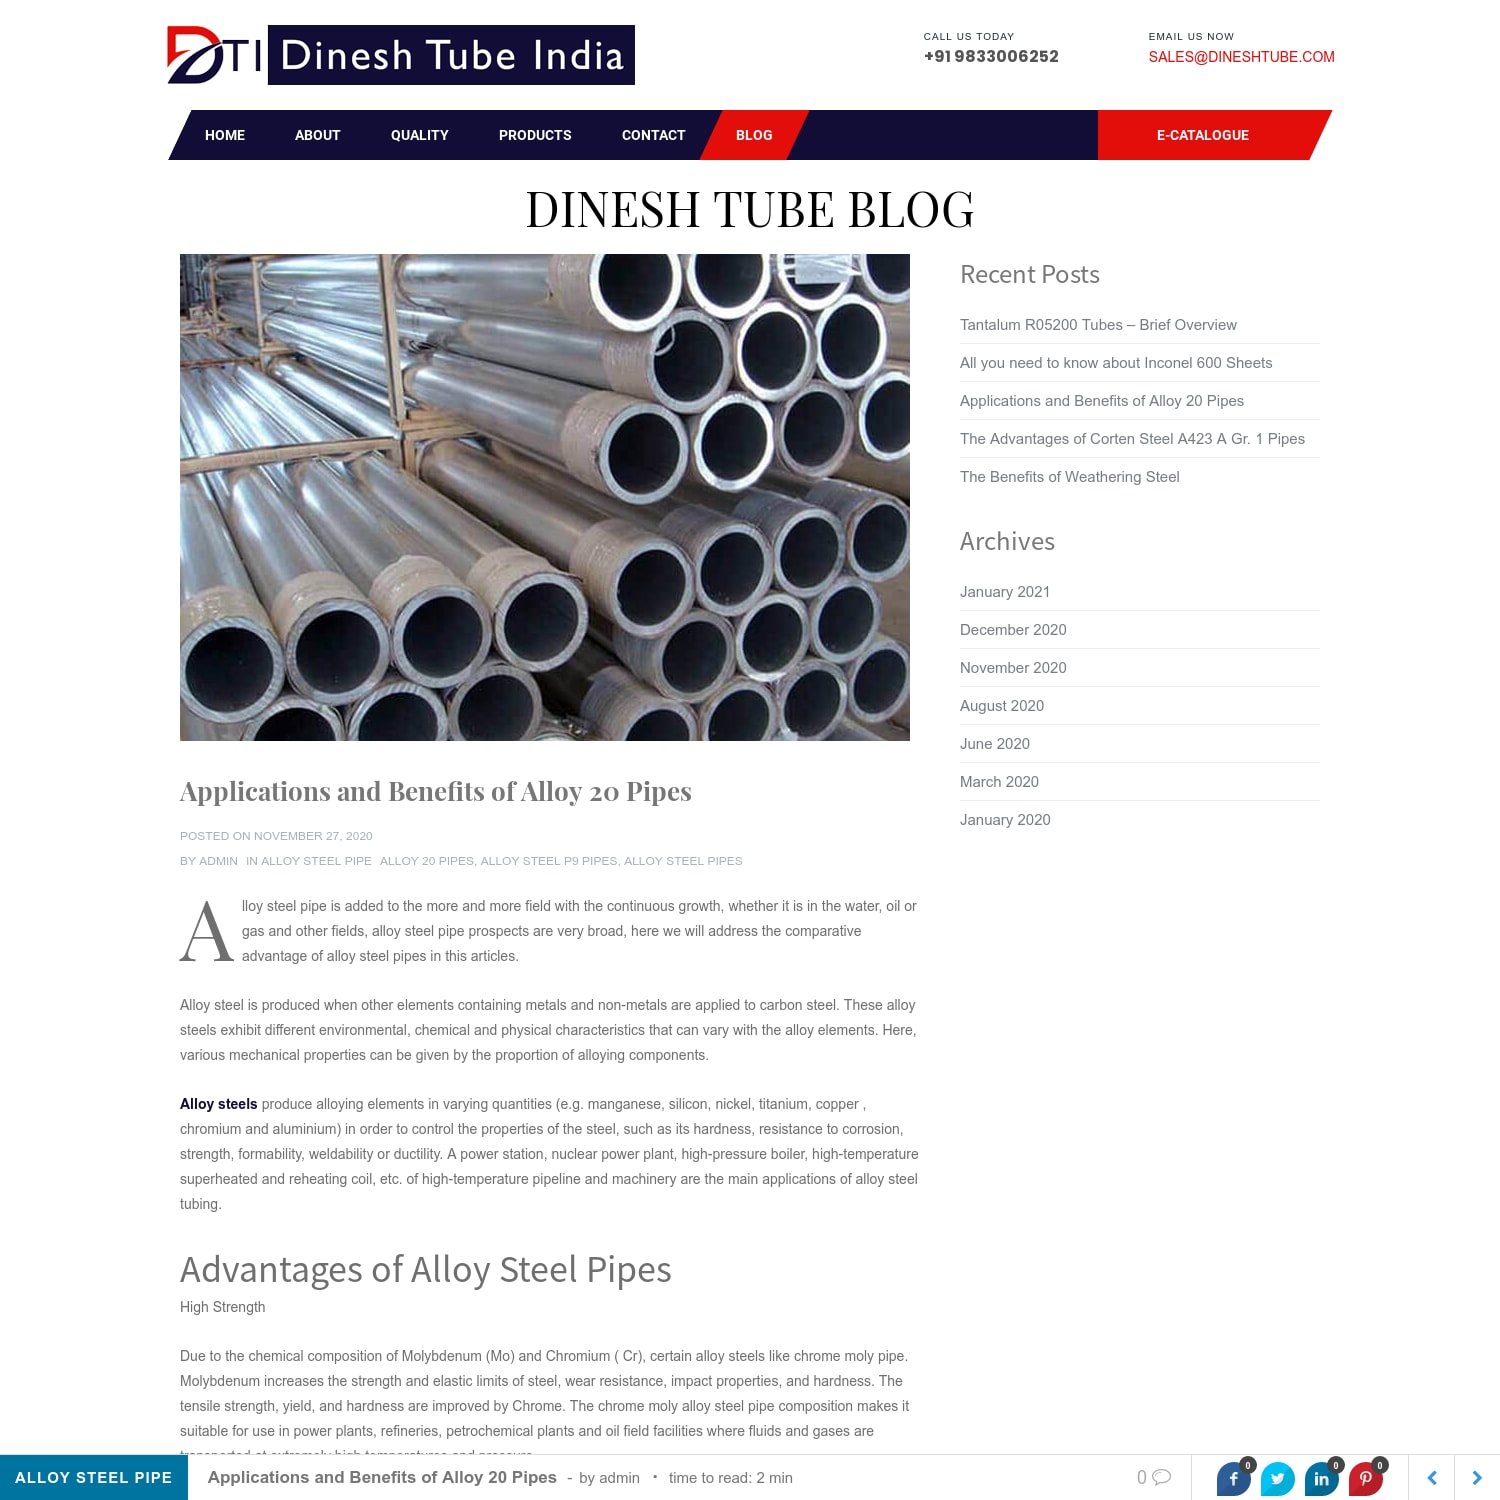 Applications and Benefits of Alloy 20 Pipes - Dinesh Tube Blog